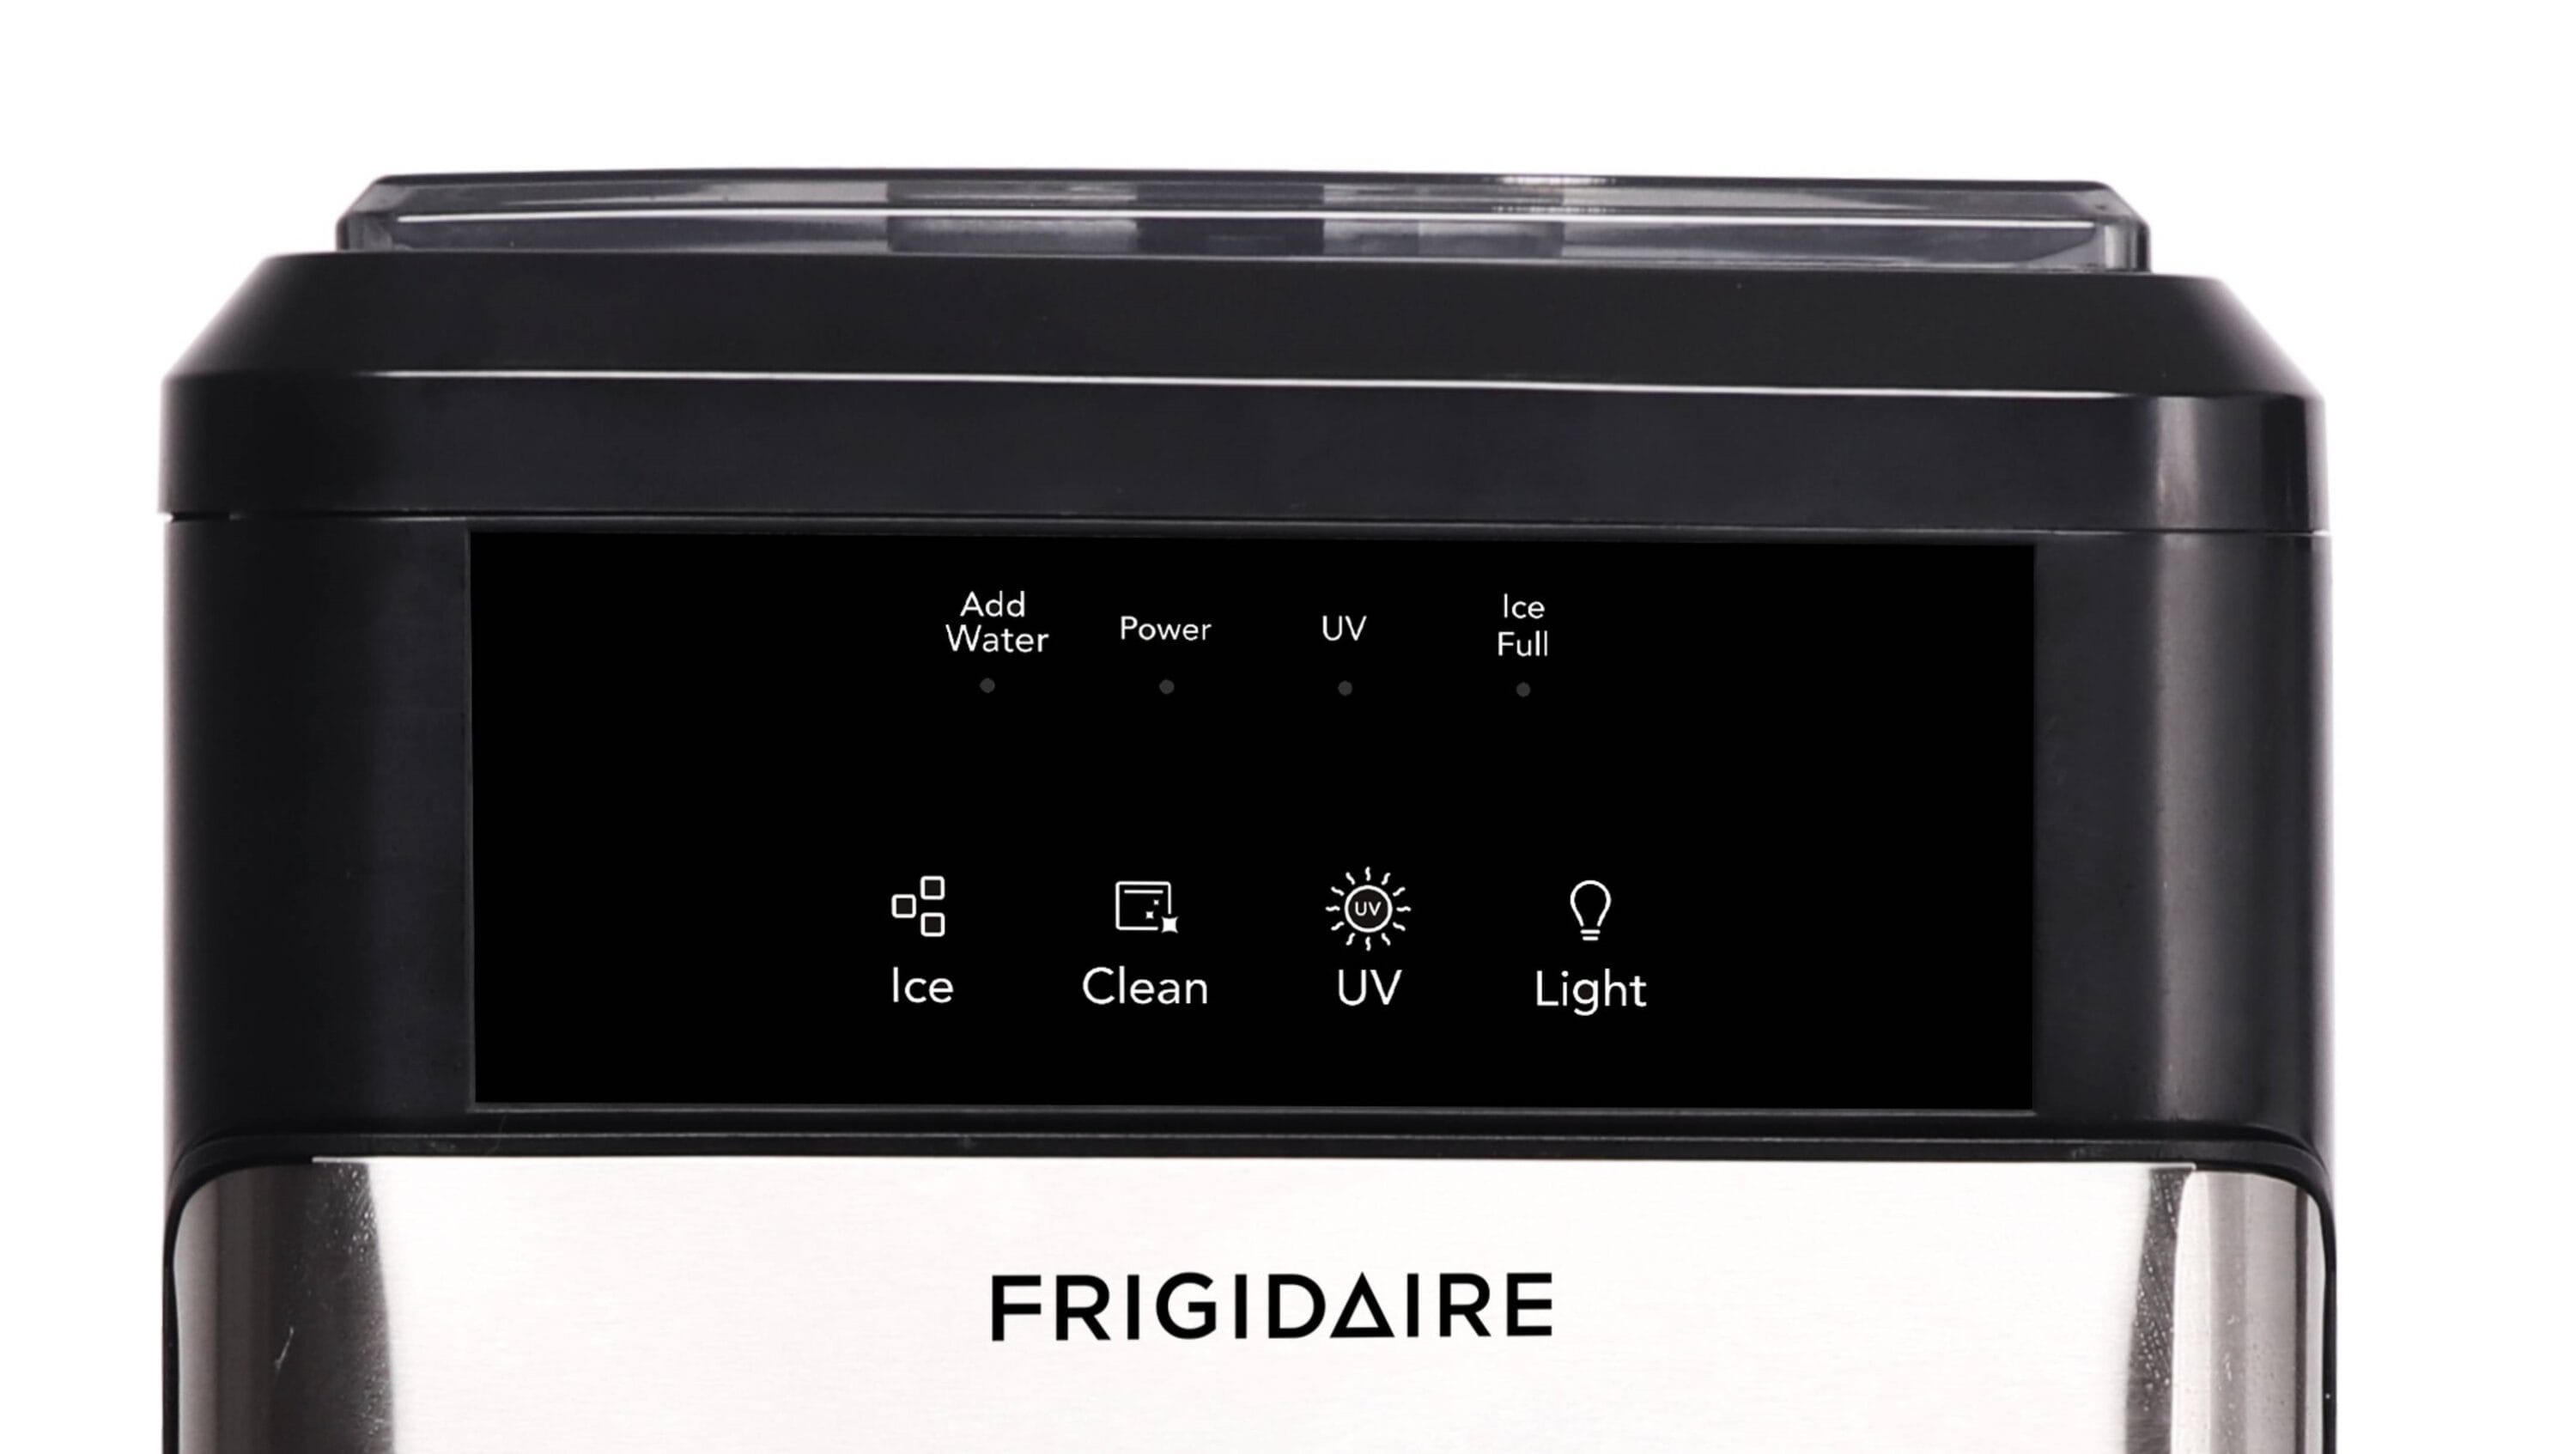  Frigidaire EFIC237 Countertop Crunchy Chewable Nugget Ice Maker,  44lbs per day, Auto Self Cleaning, Black Stainless : Appliances